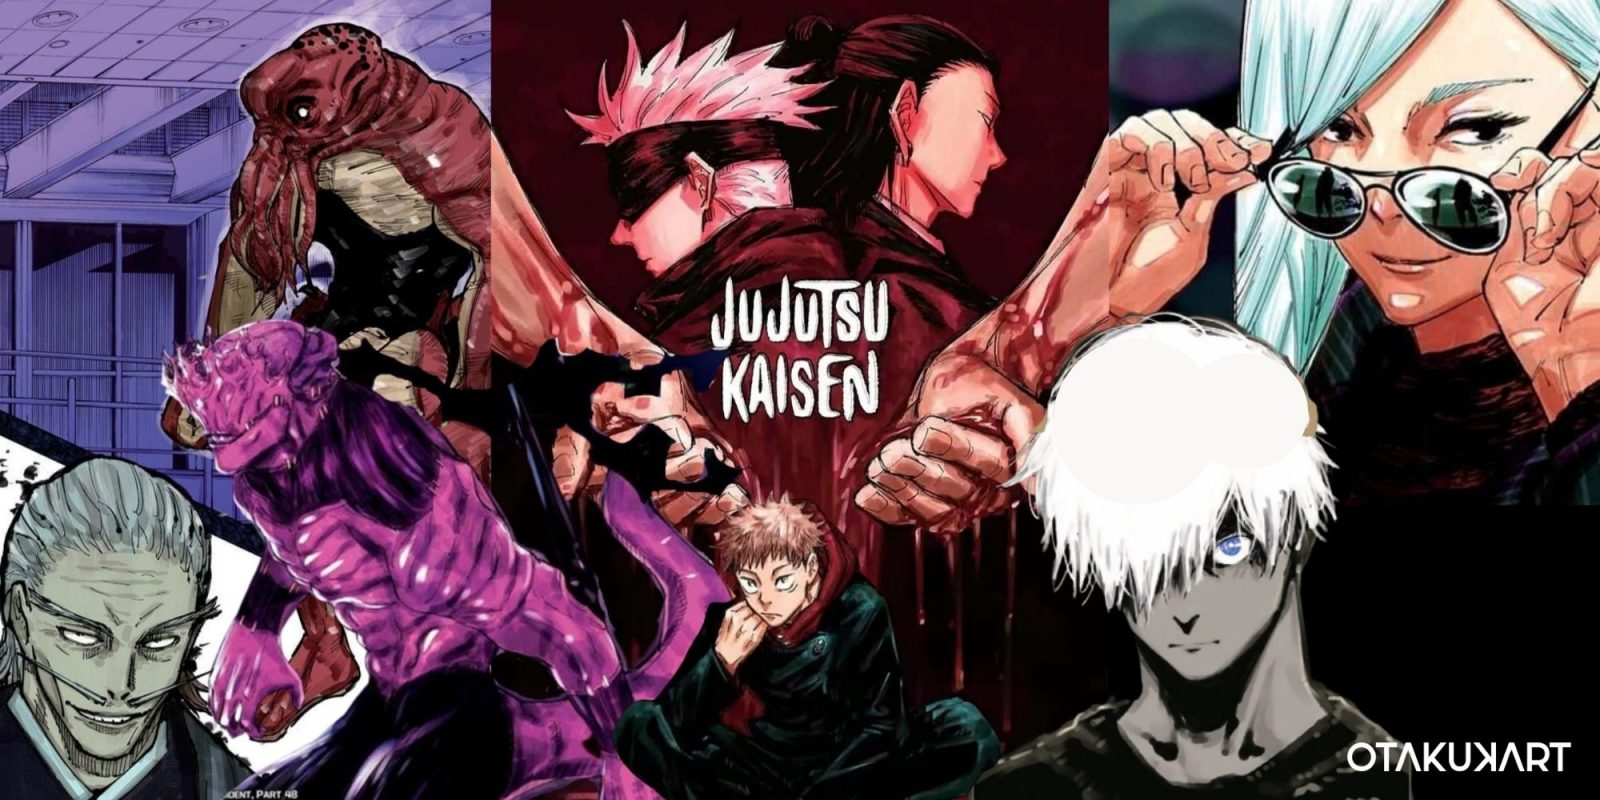 10 Most Awaited Moments from Jujutsu Kaisen Manga that may get animated for JJK S2